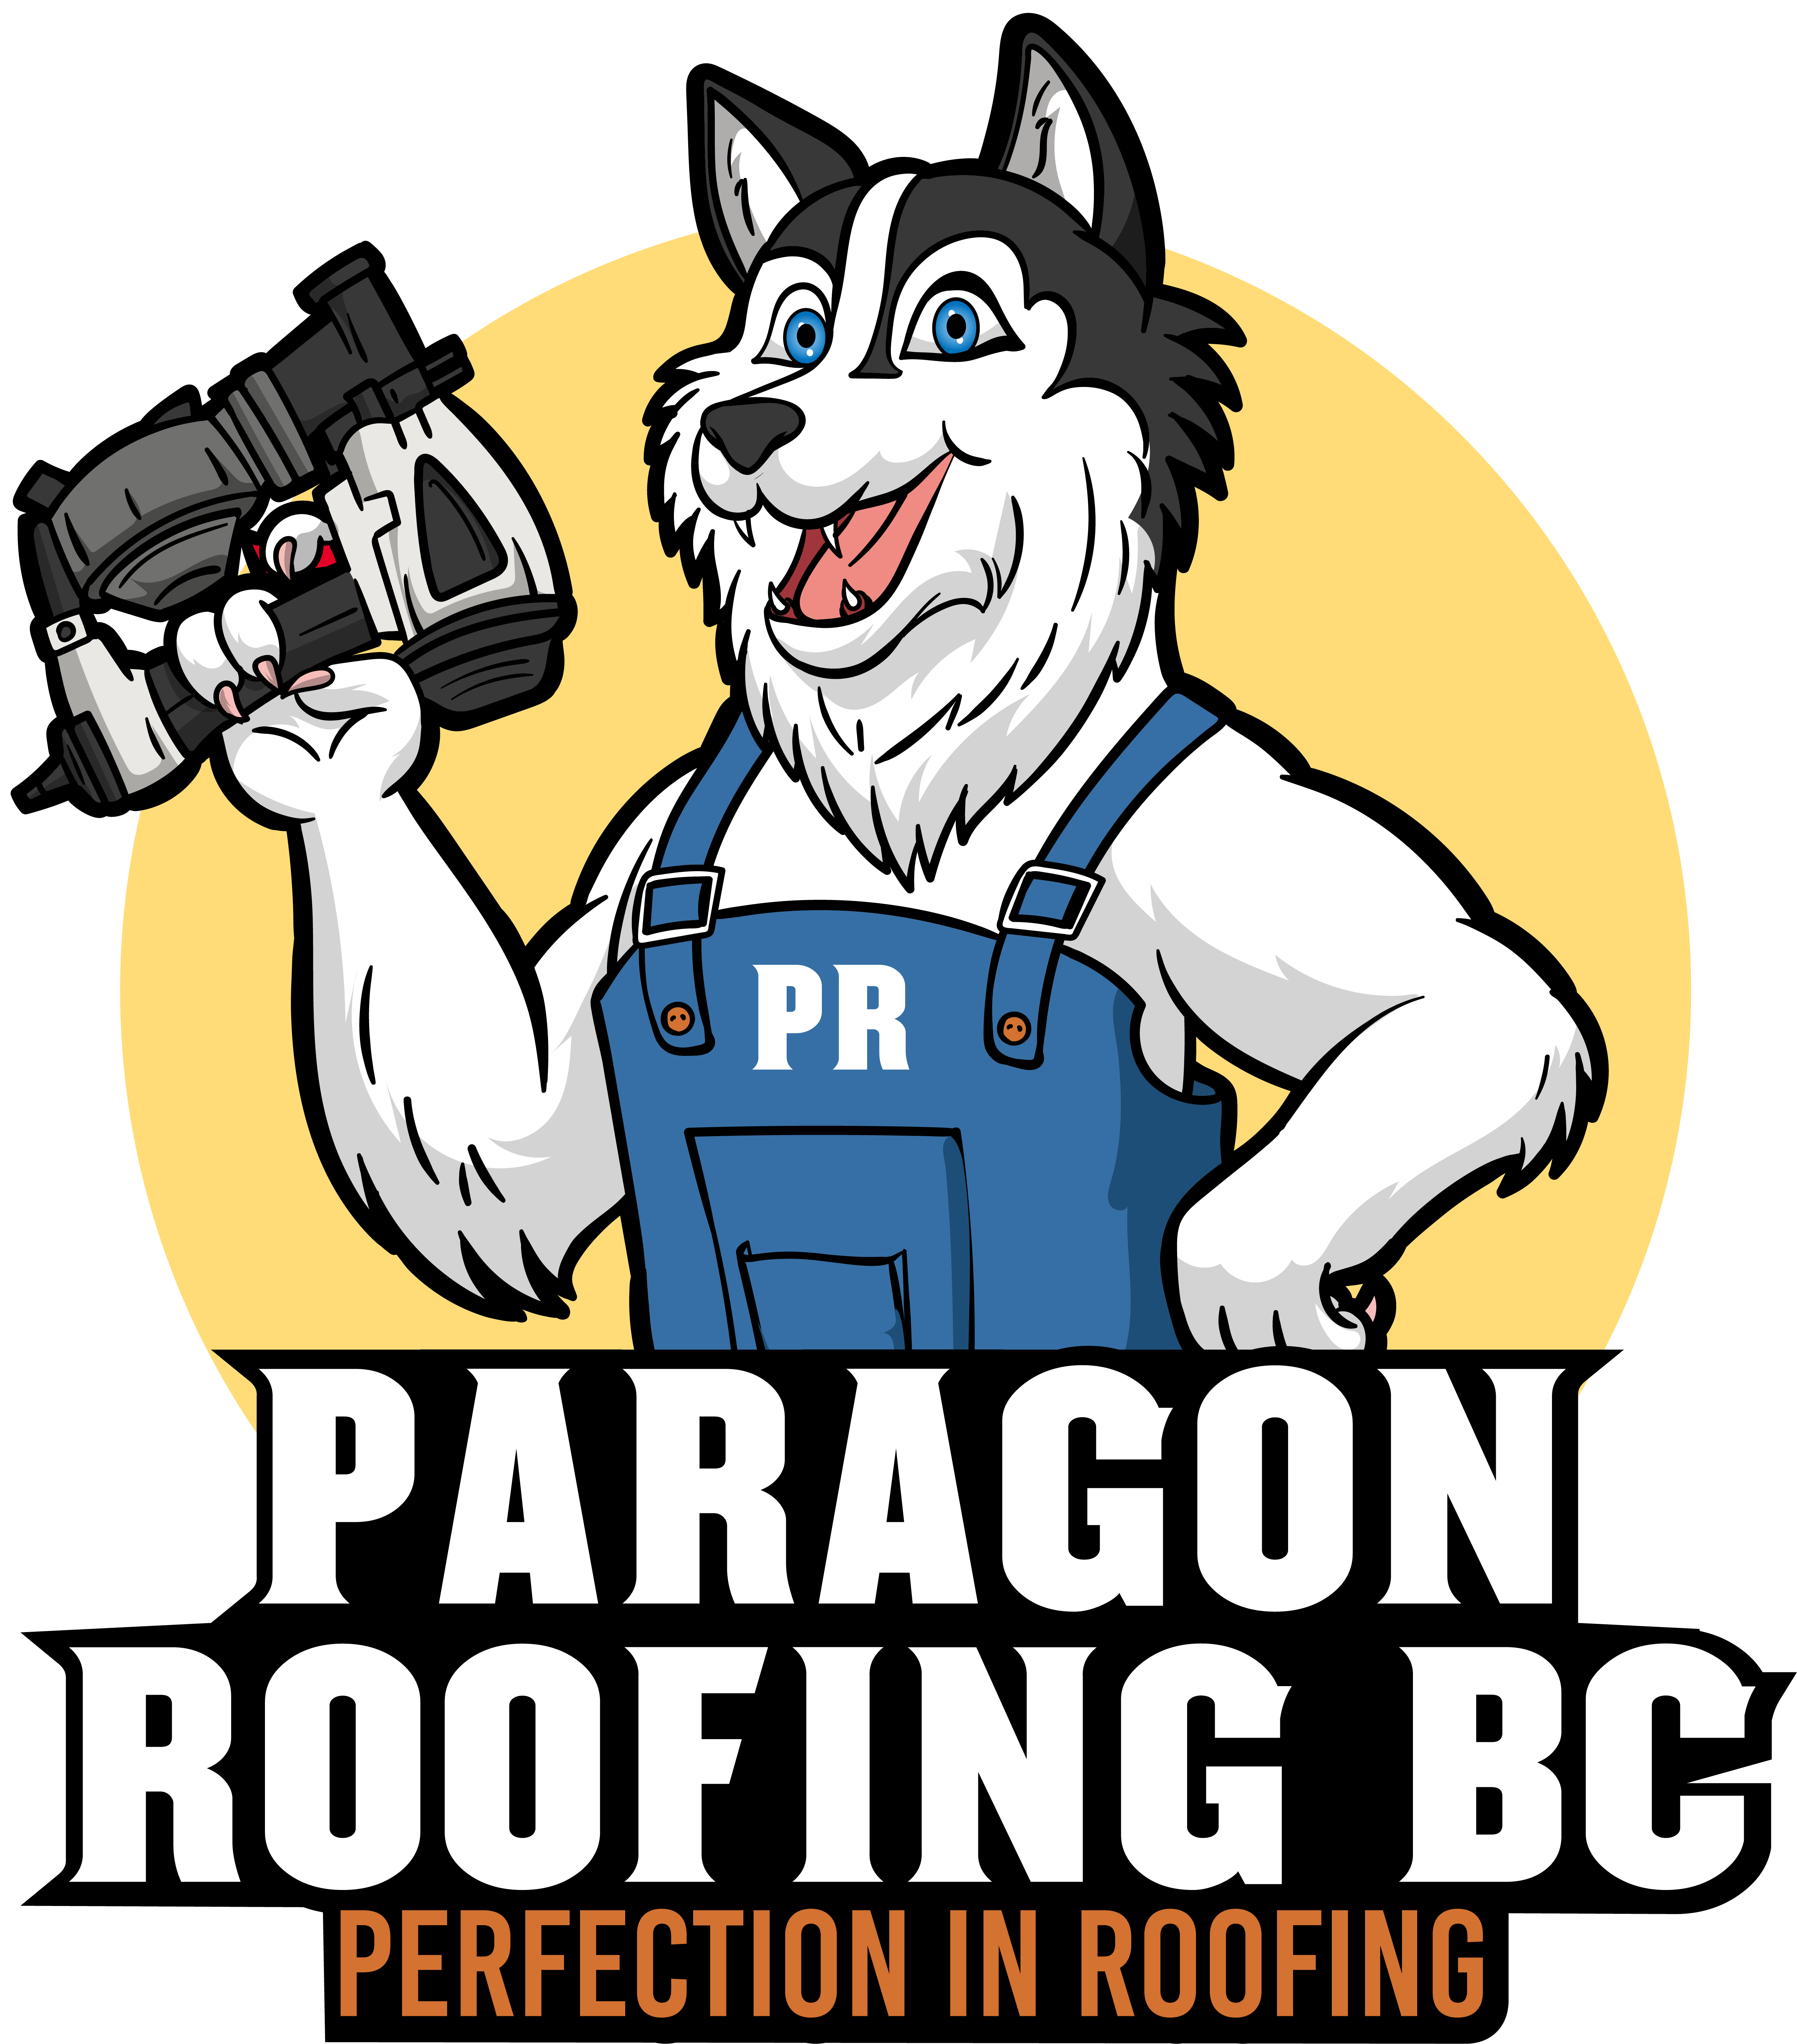 Paragon Roofing BC- Roofing Contractor Vancouver logo